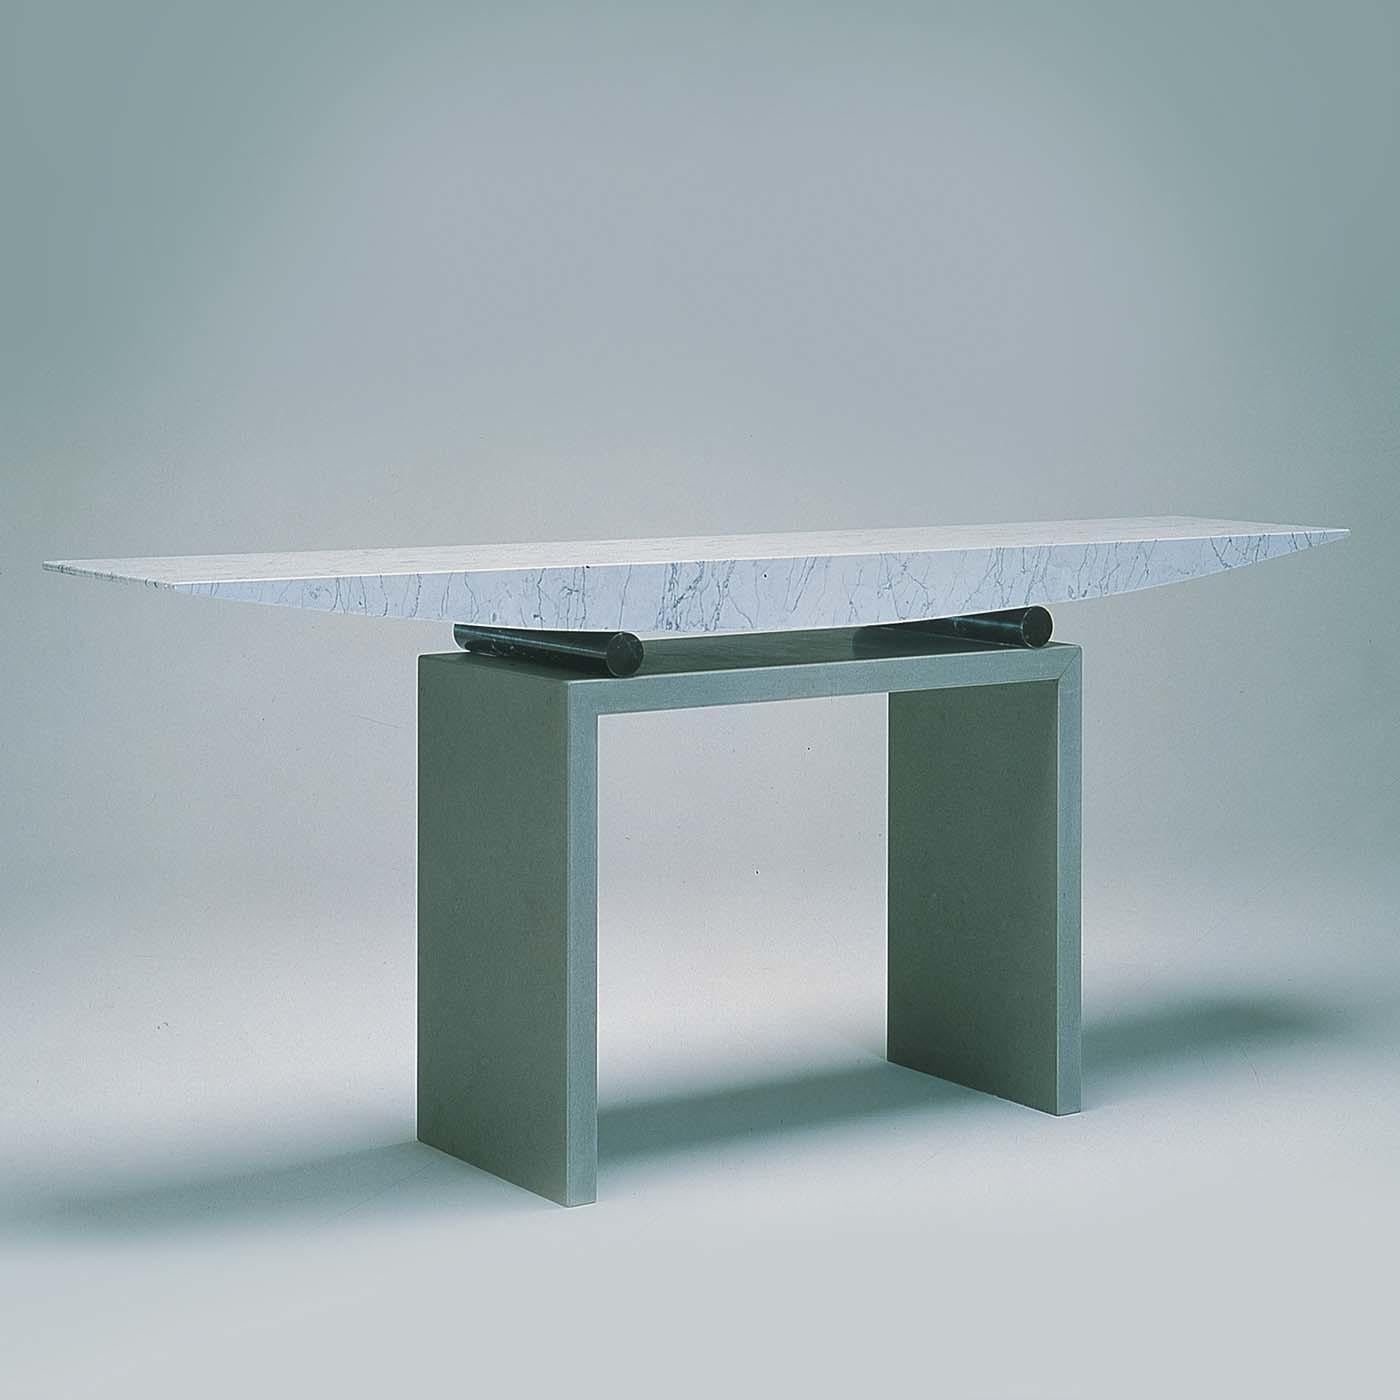 An eye-catching design with a nod to the silhouette of Japanese pagodas that was created in 1987 by Danilo Silvestrin. The base of this streamlined, simple frame is made of solid pietra serena (gray sandstone) in an angled shape and features two